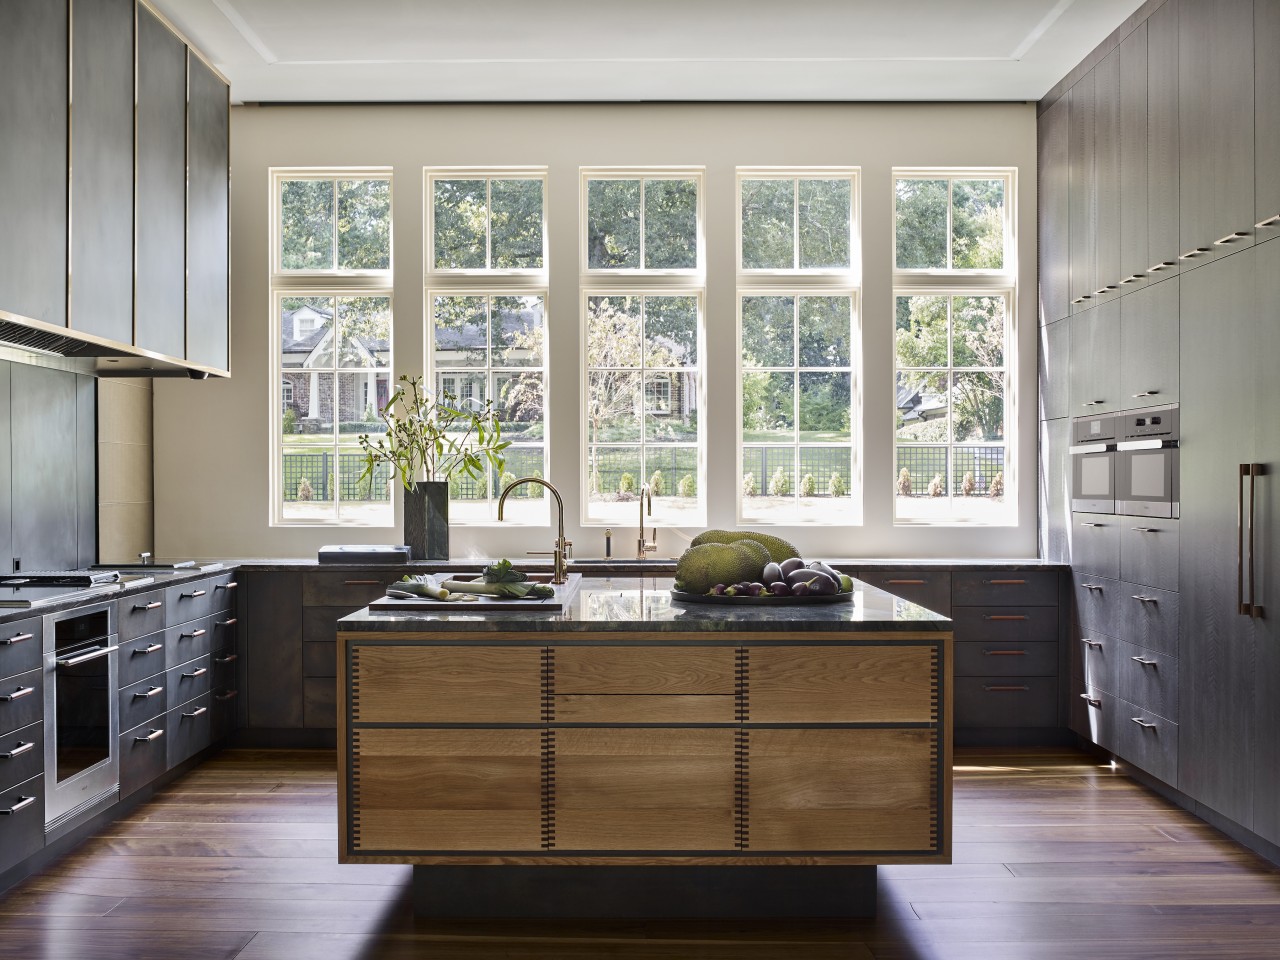 Refined livery – the cabinetry features a surprising 